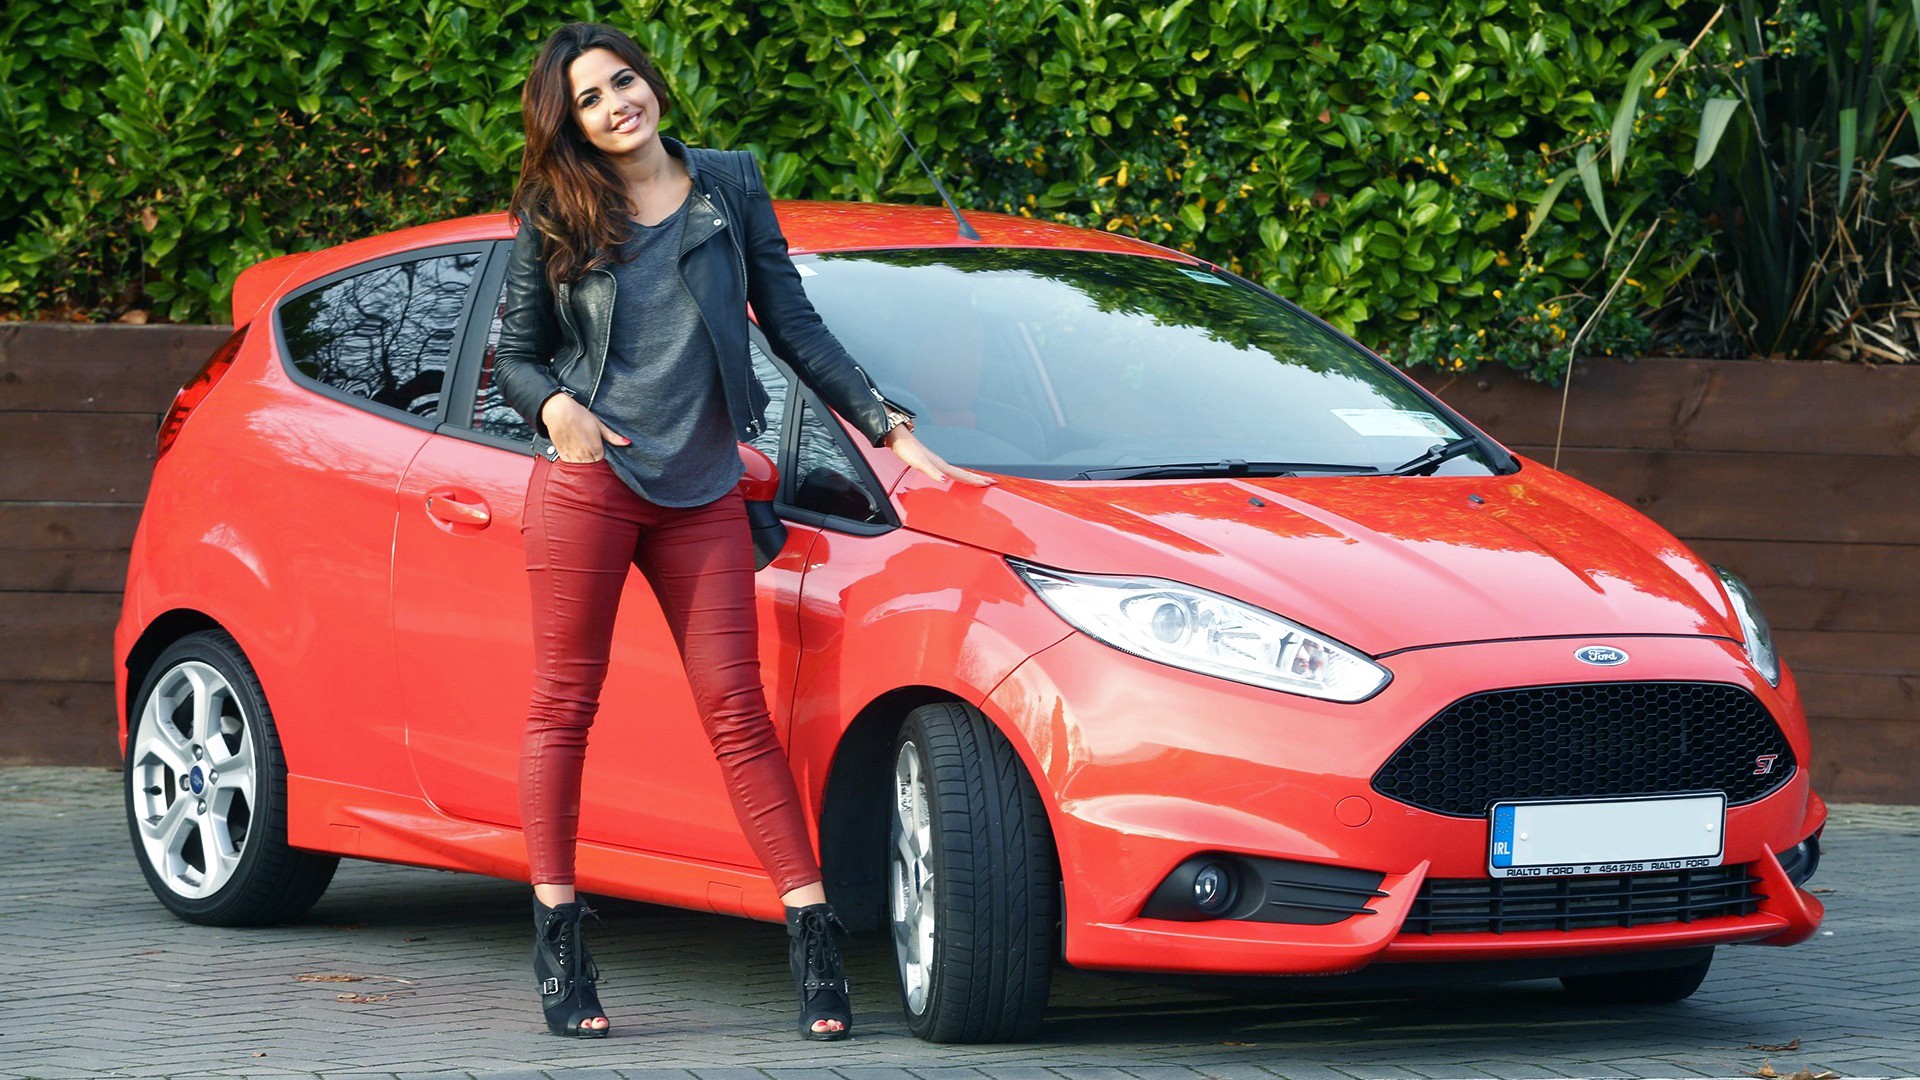 women With Cars, Ford Fiesta, Red Cars, High Heels, Ford Wallpaper